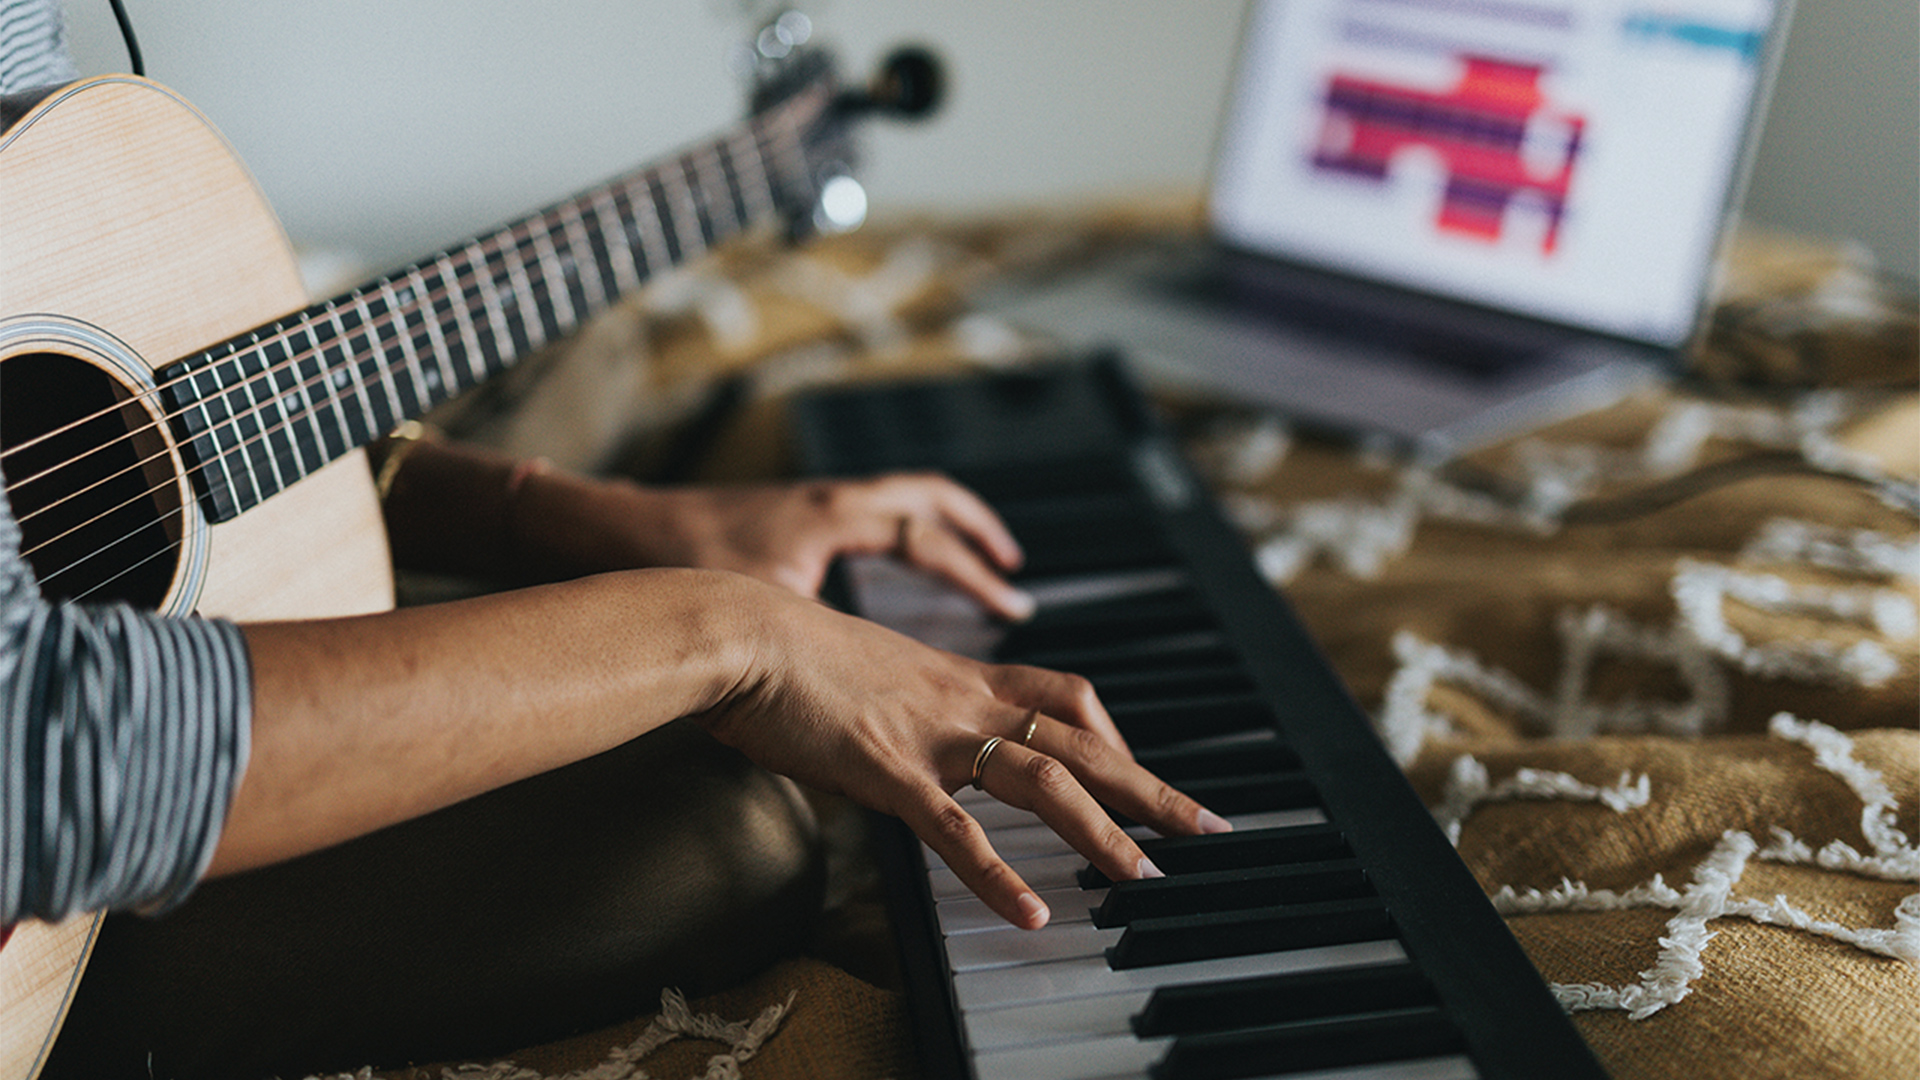 A person sat on a bed, playing a keyboard with a guitar on their lap